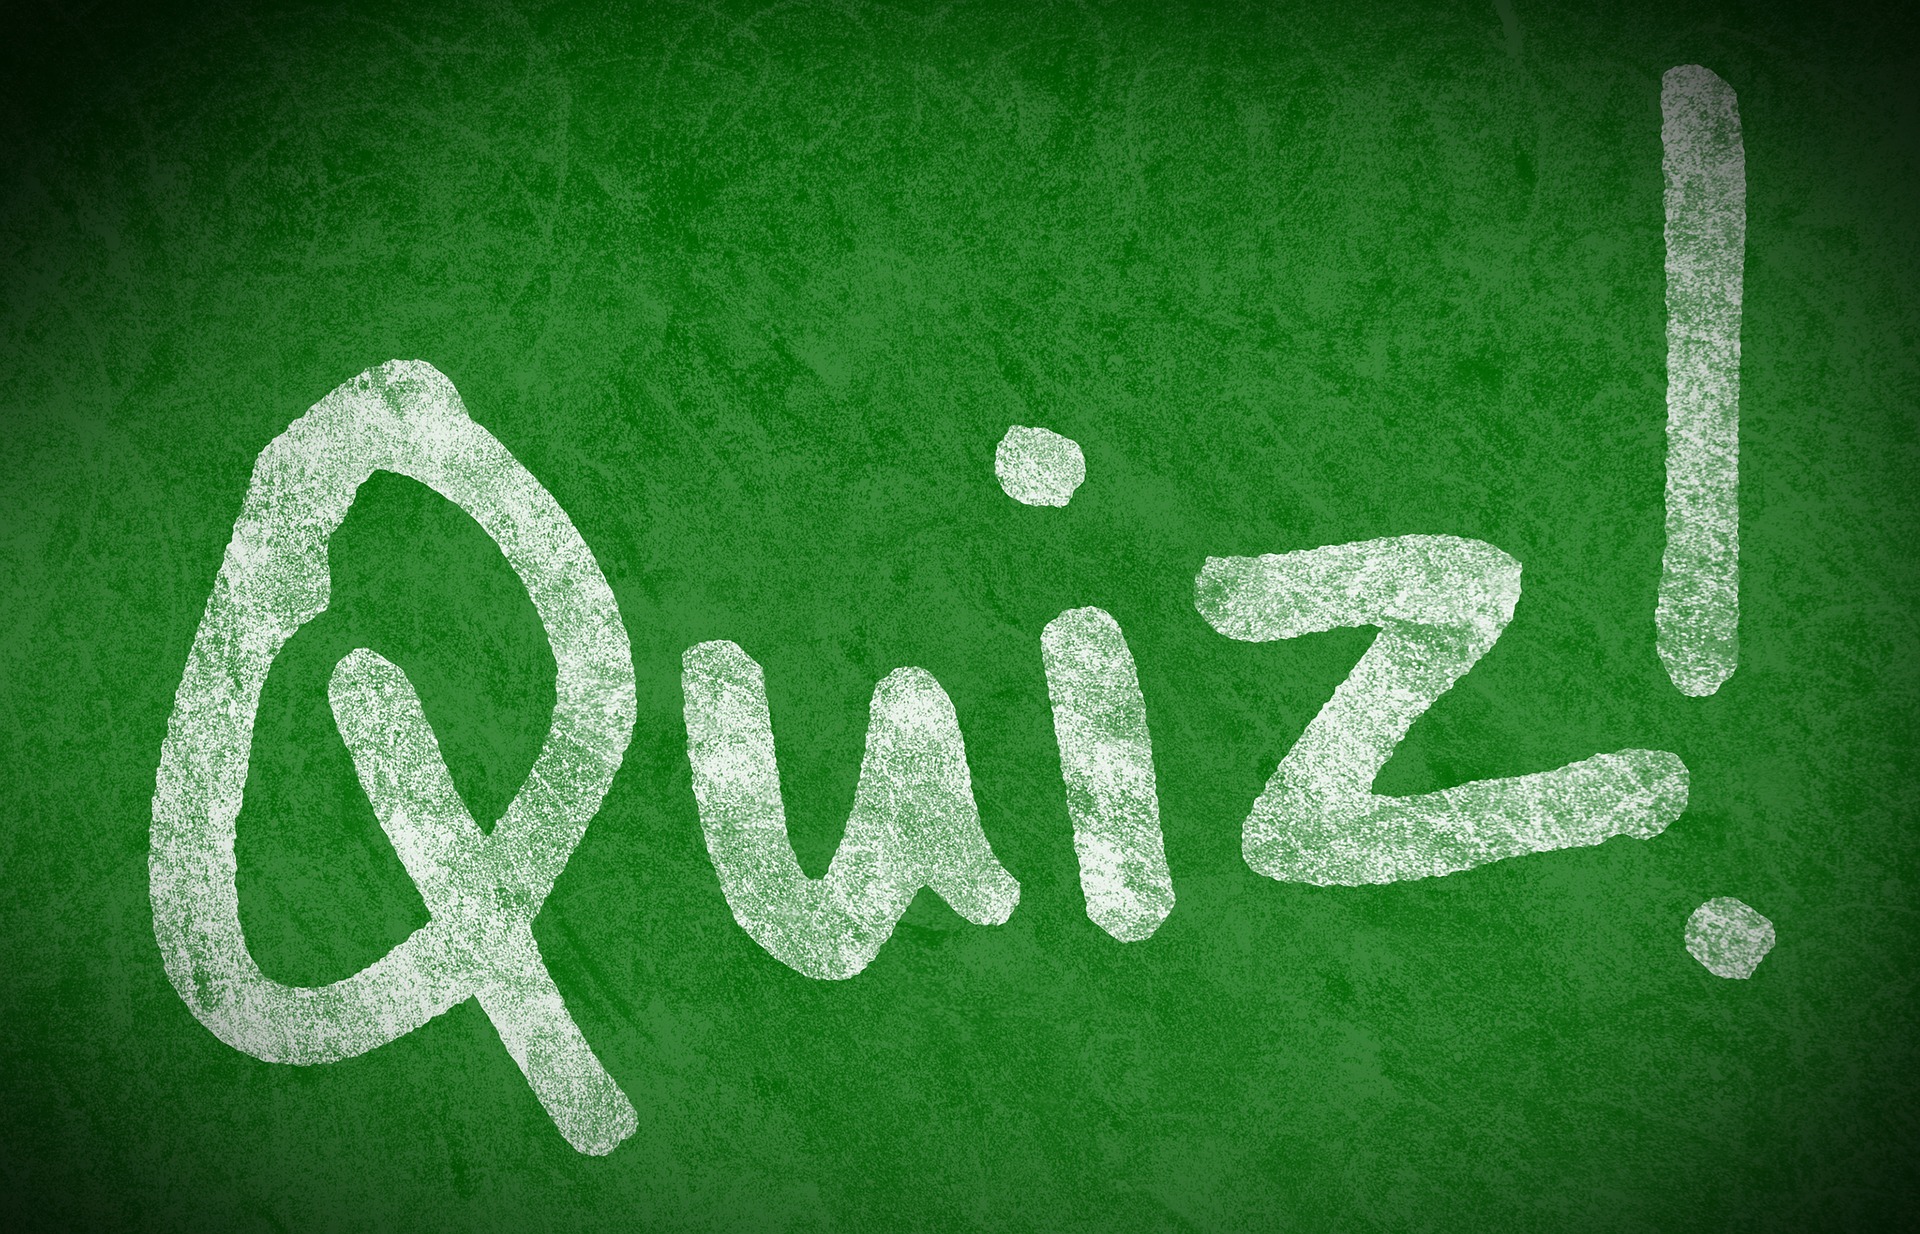 GRAPHIC: Quiz written on chalkboard. Graphic courtesy of Mary Pahlke from Pixabay.